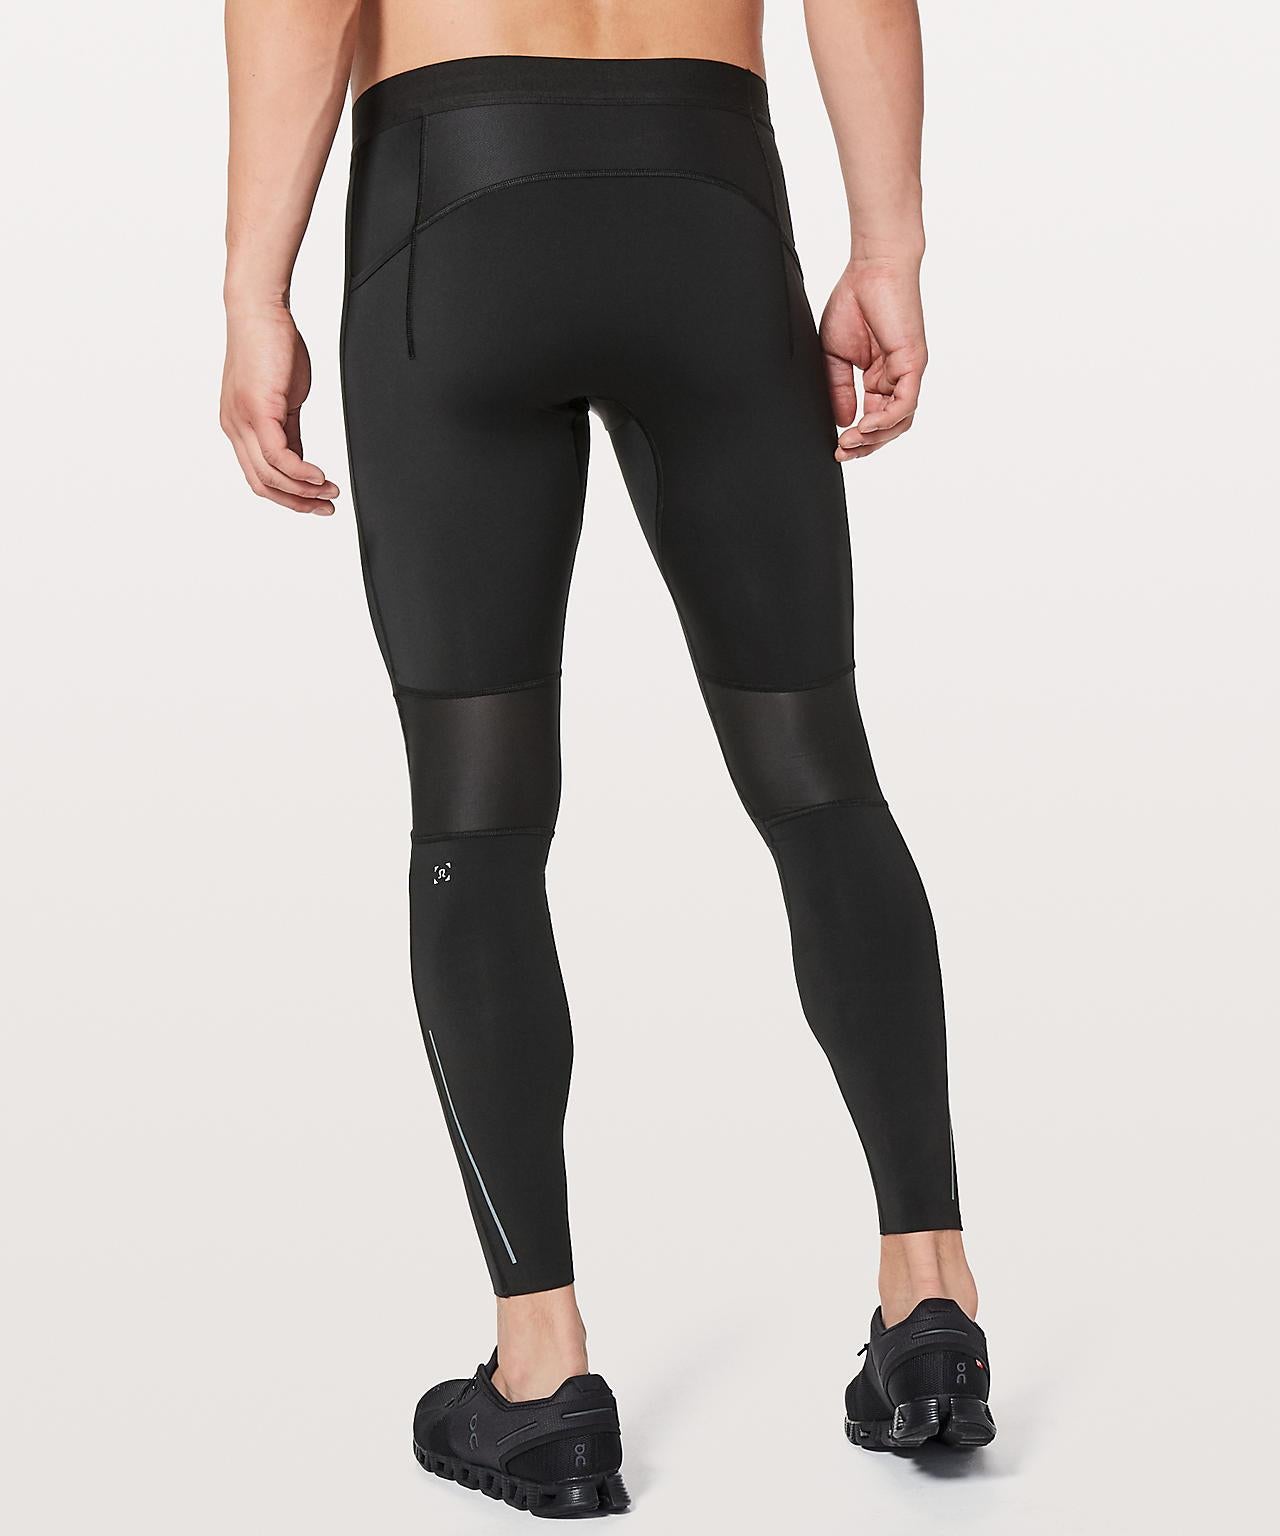 Lululemon tights are perfect for weight-lifting (Lululemon)